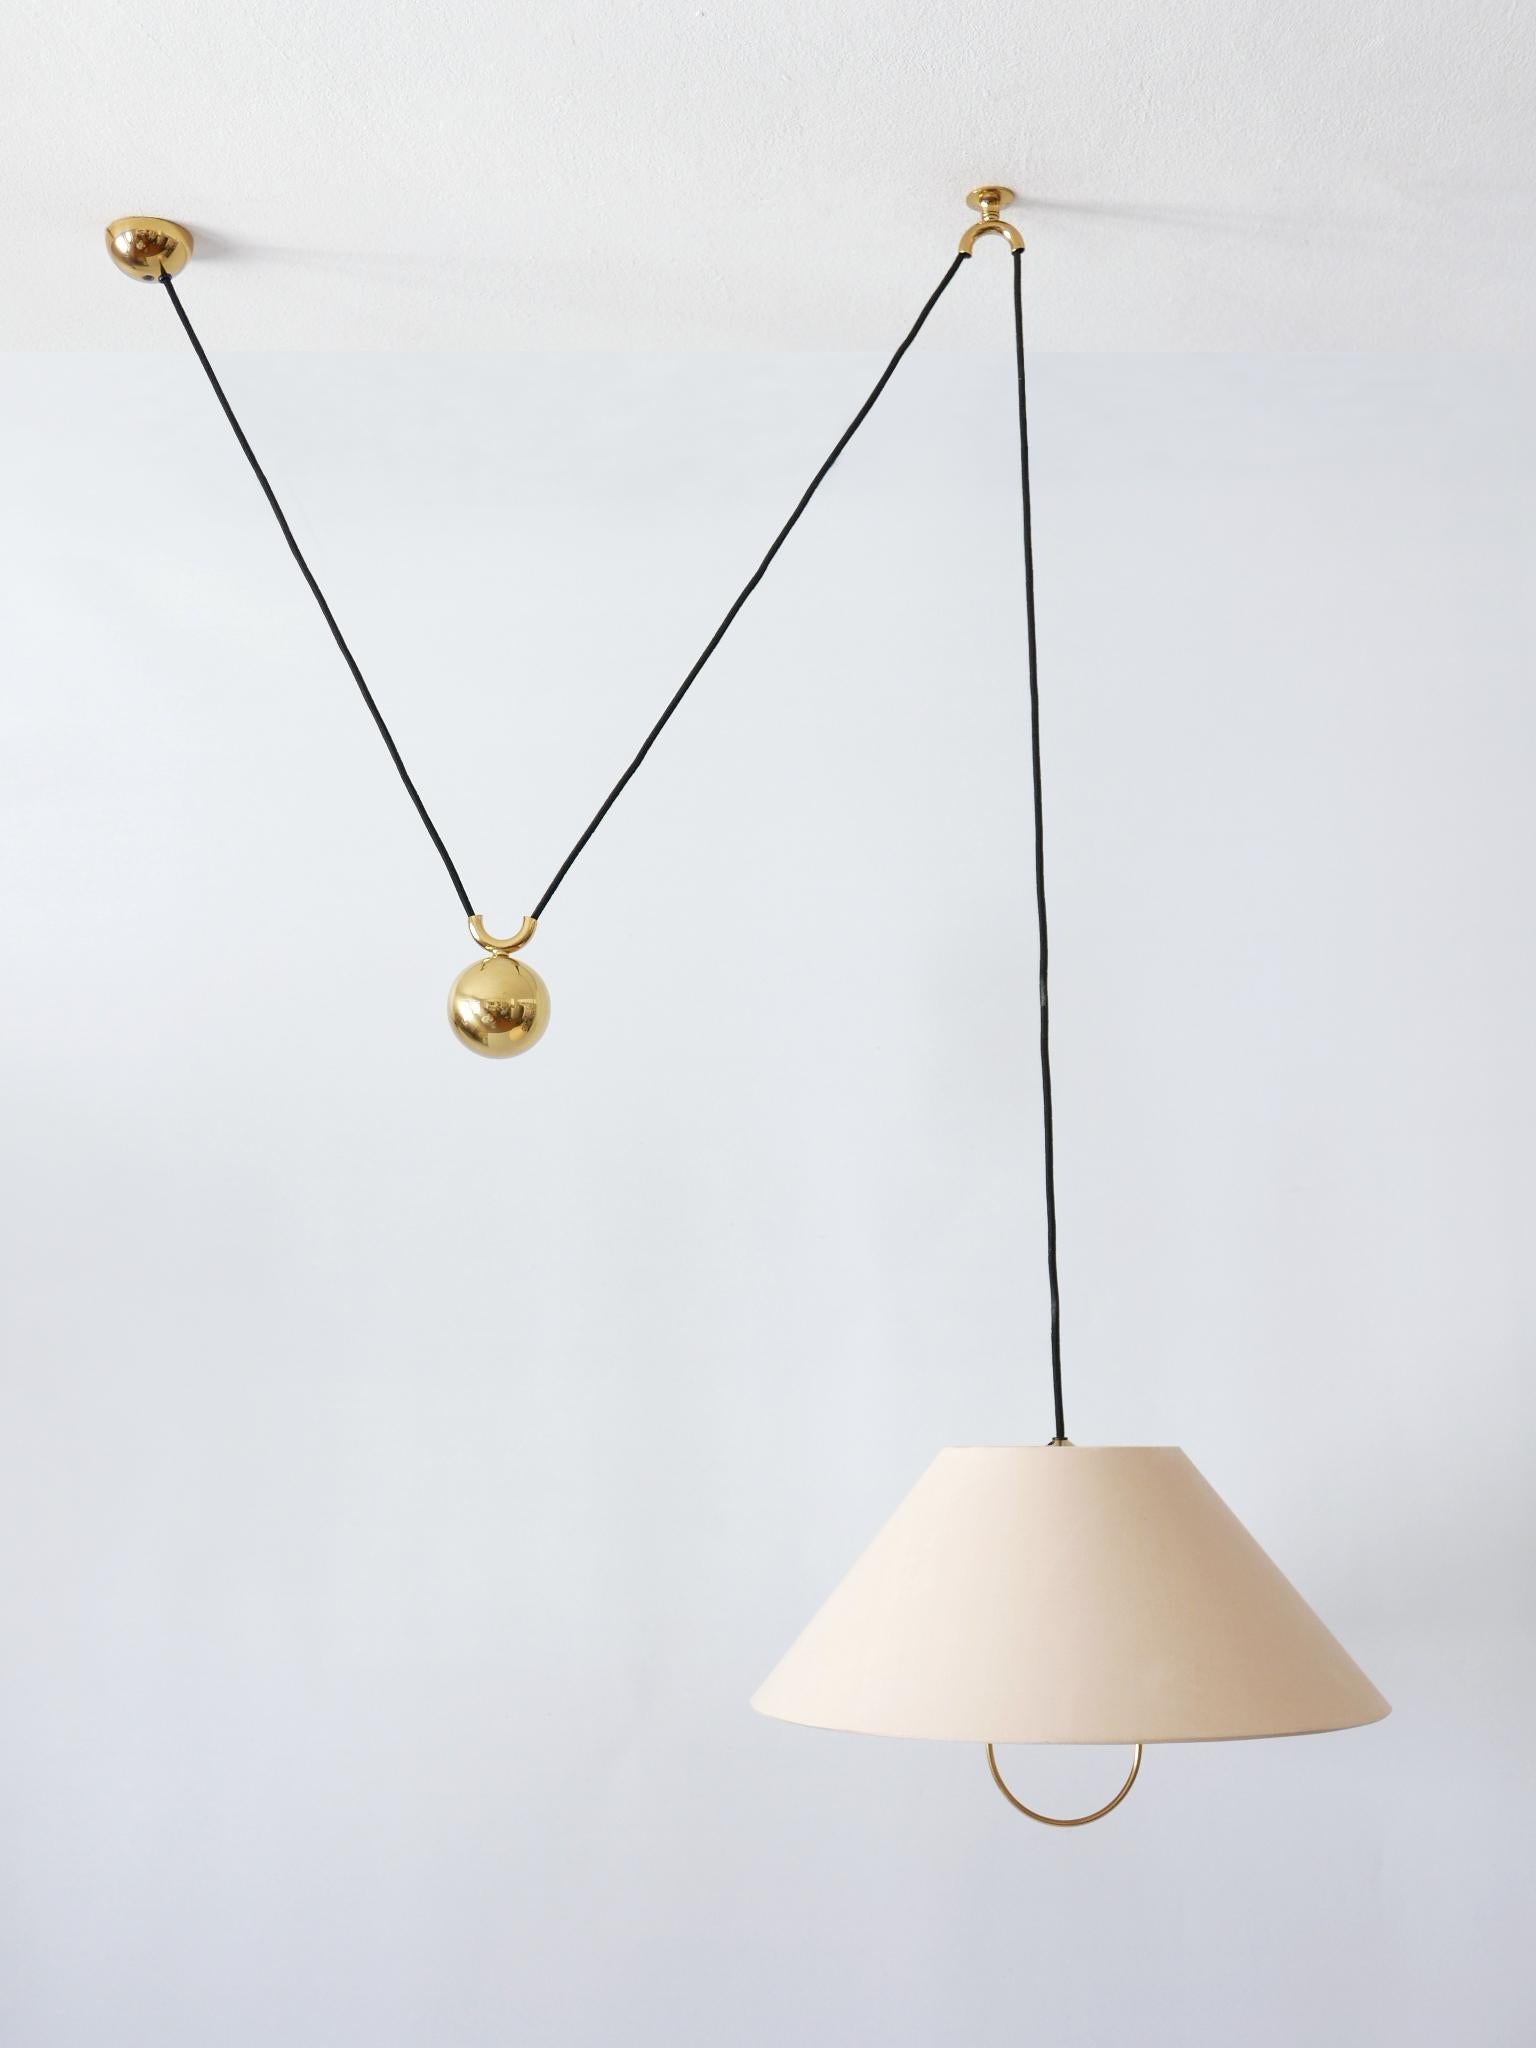 Early, Rare & Elegant Counterweight Pendant Lamp by Florian Schulz Germany 1960s 2